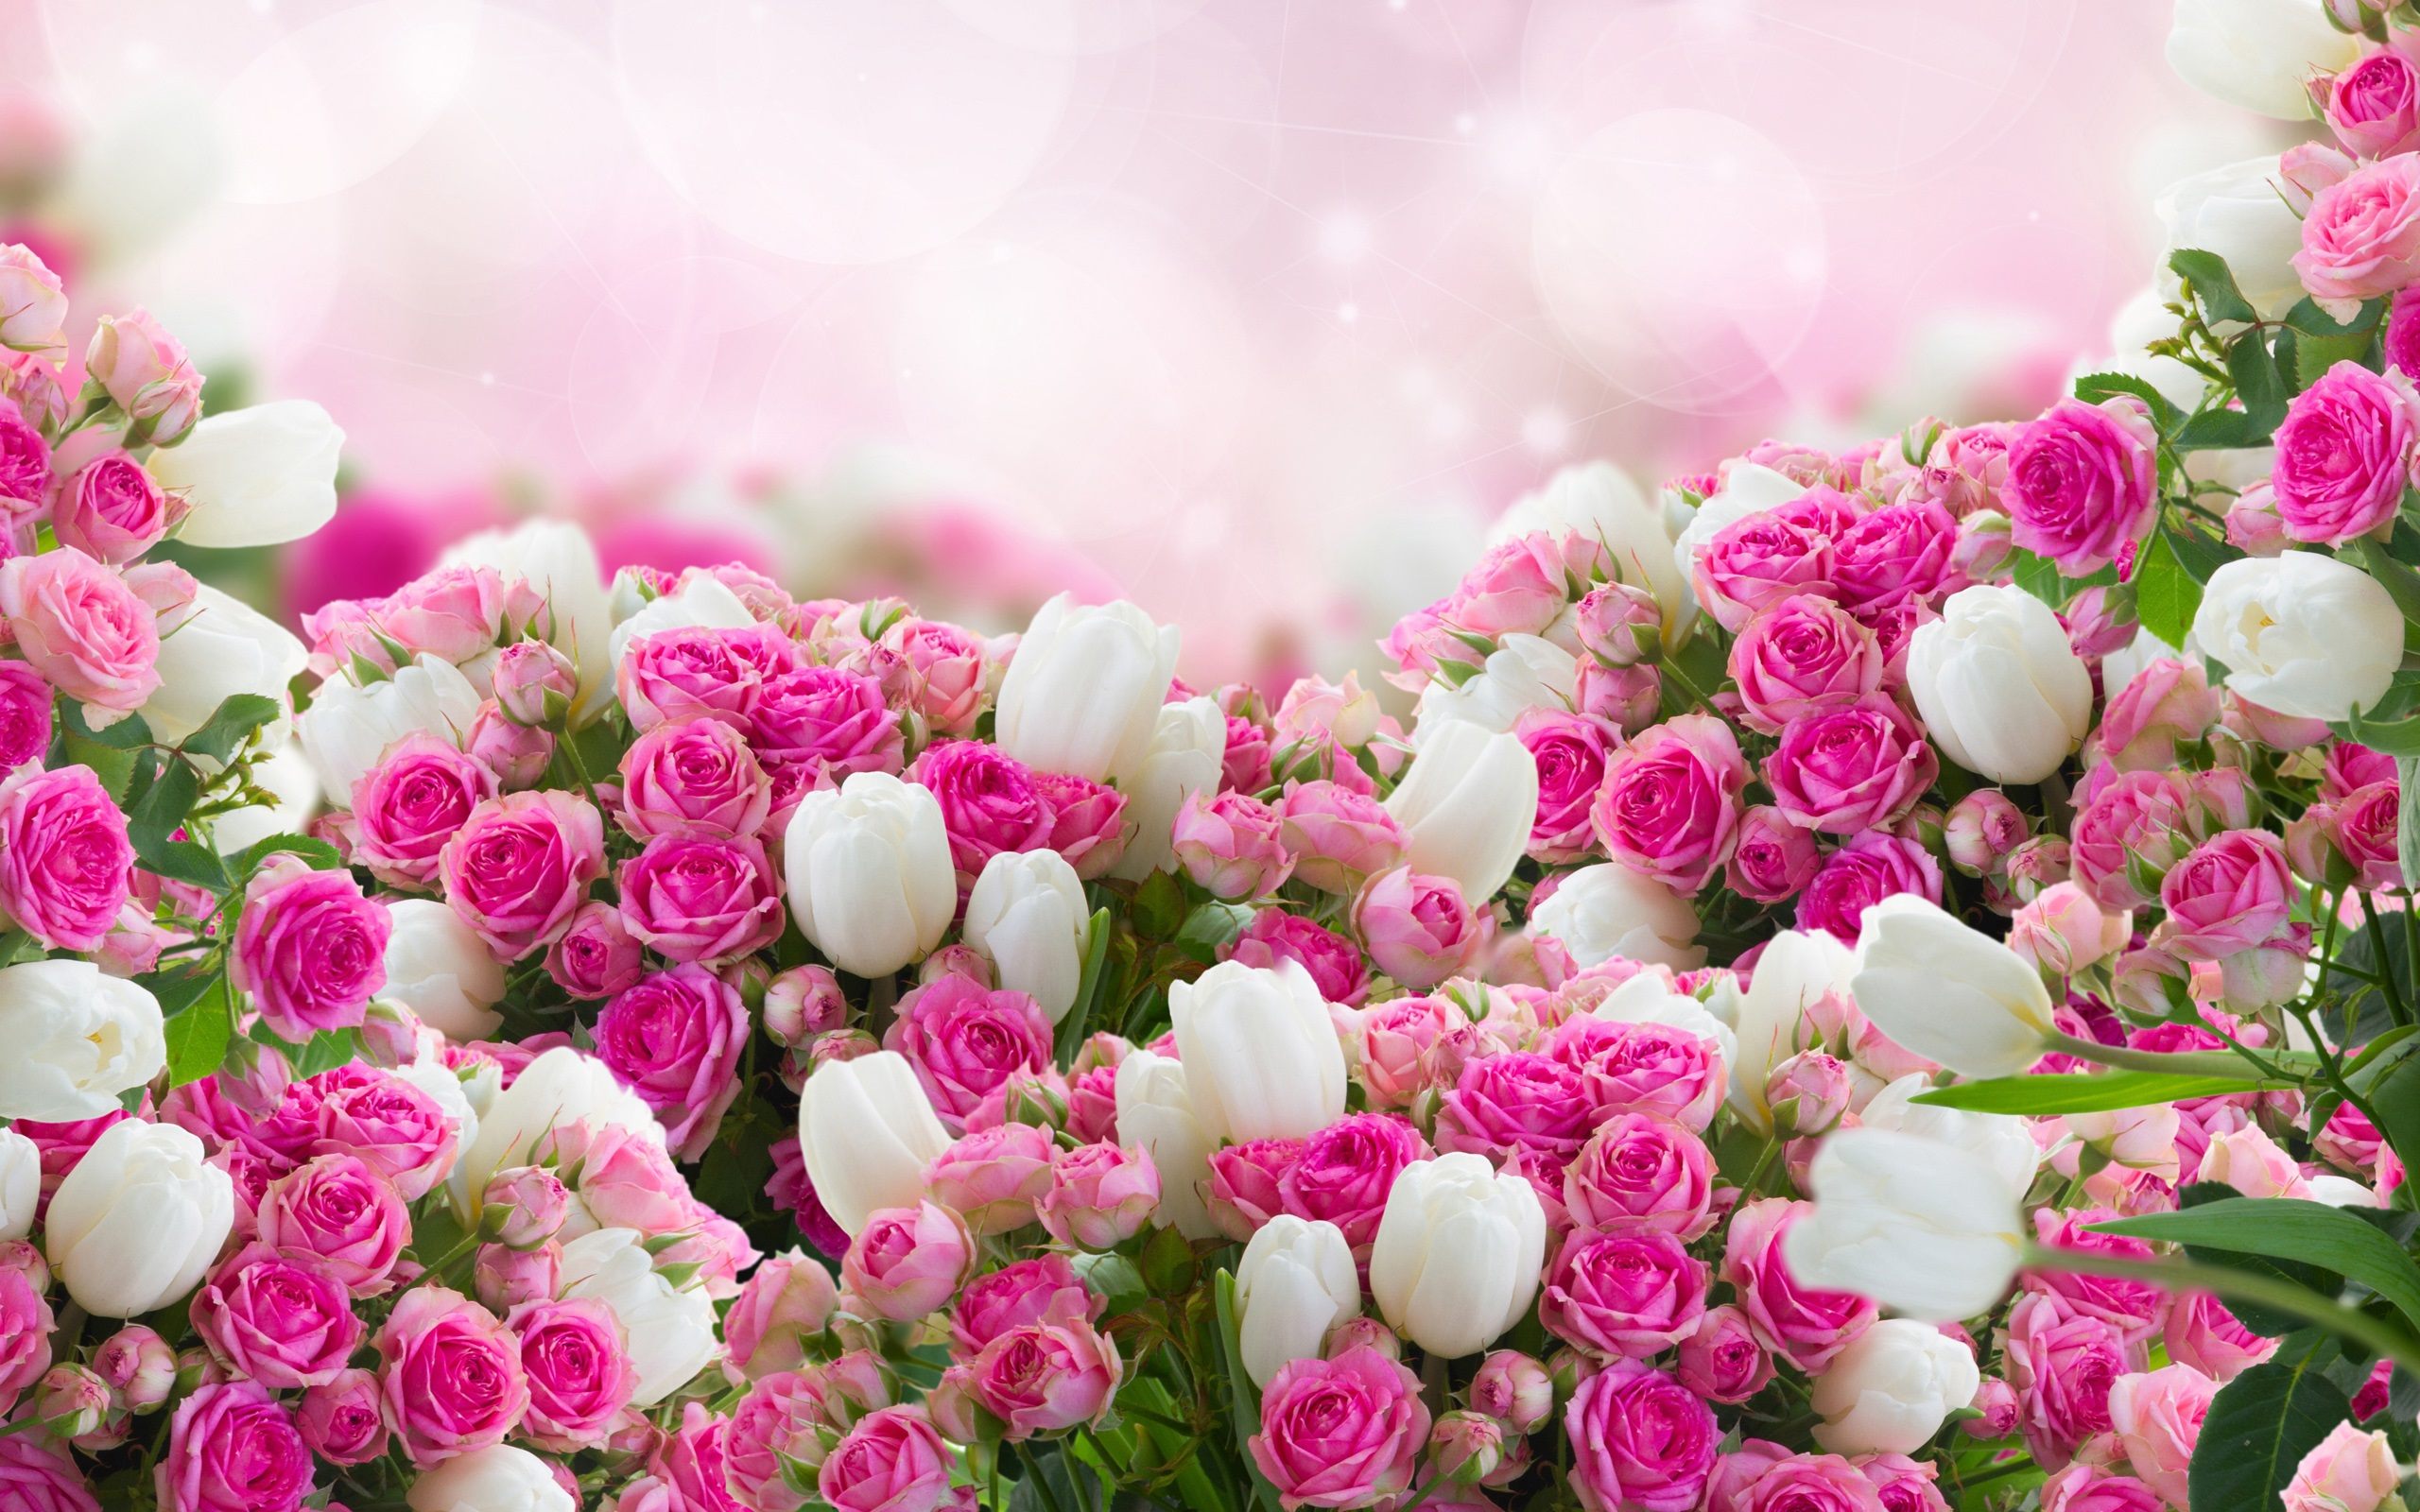 Flowers wallpaper images